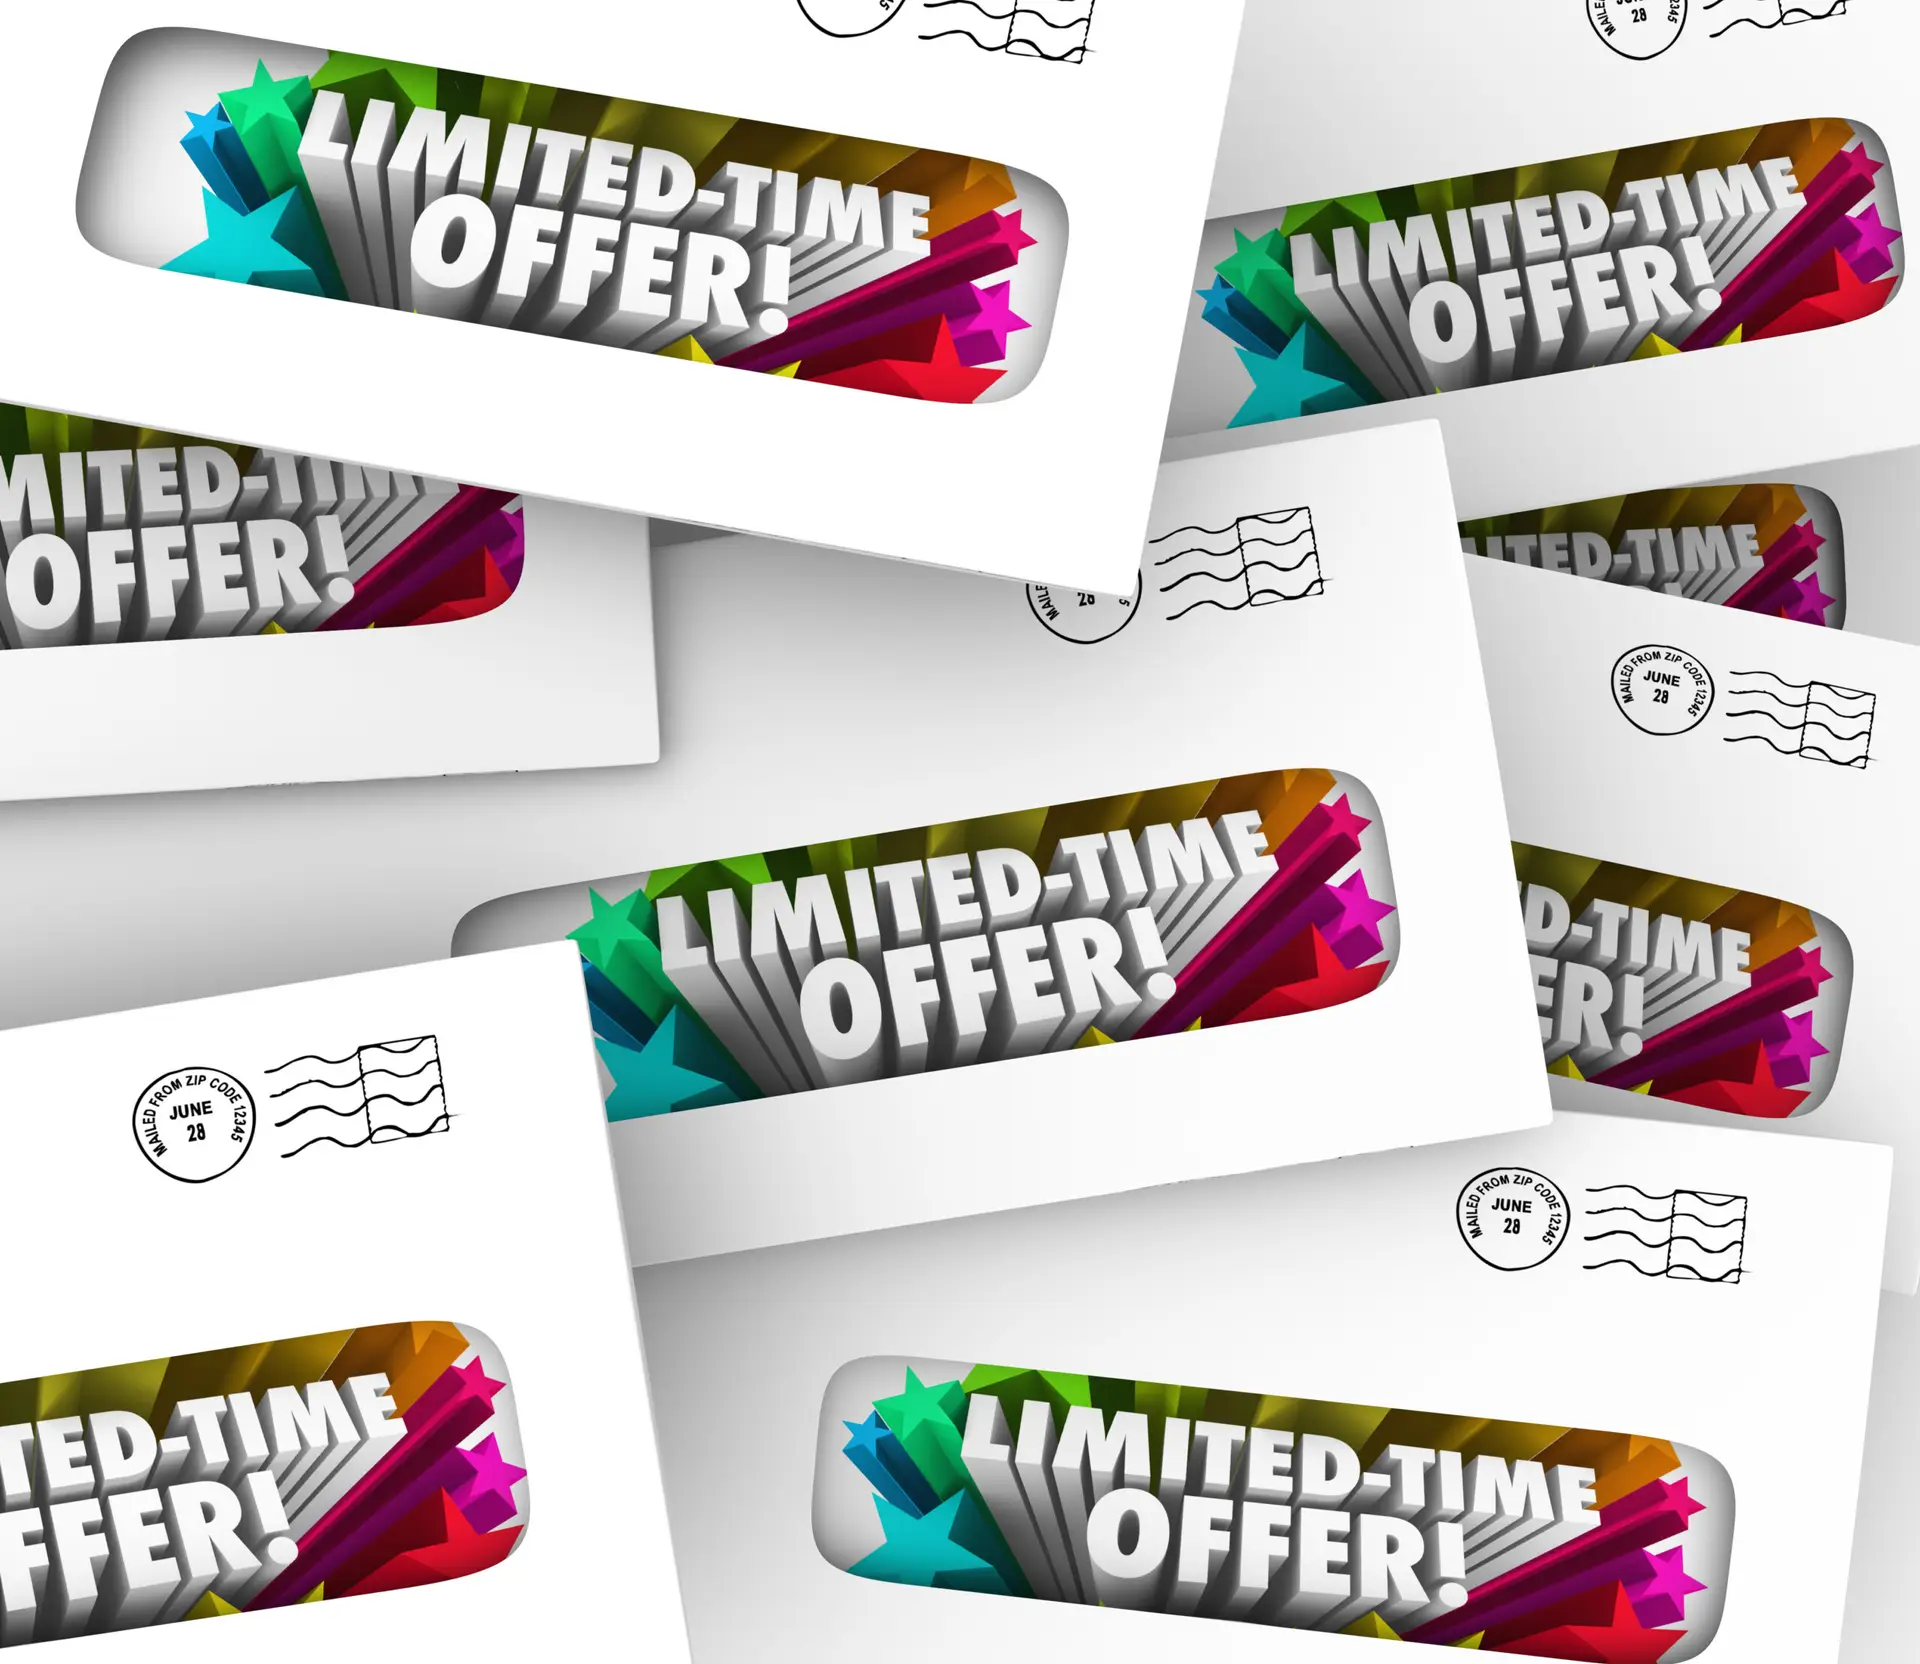 Limited Time Offer words in white envelopes as junk or direct mail bombarding you with advertising for a special sale or discount shopping event